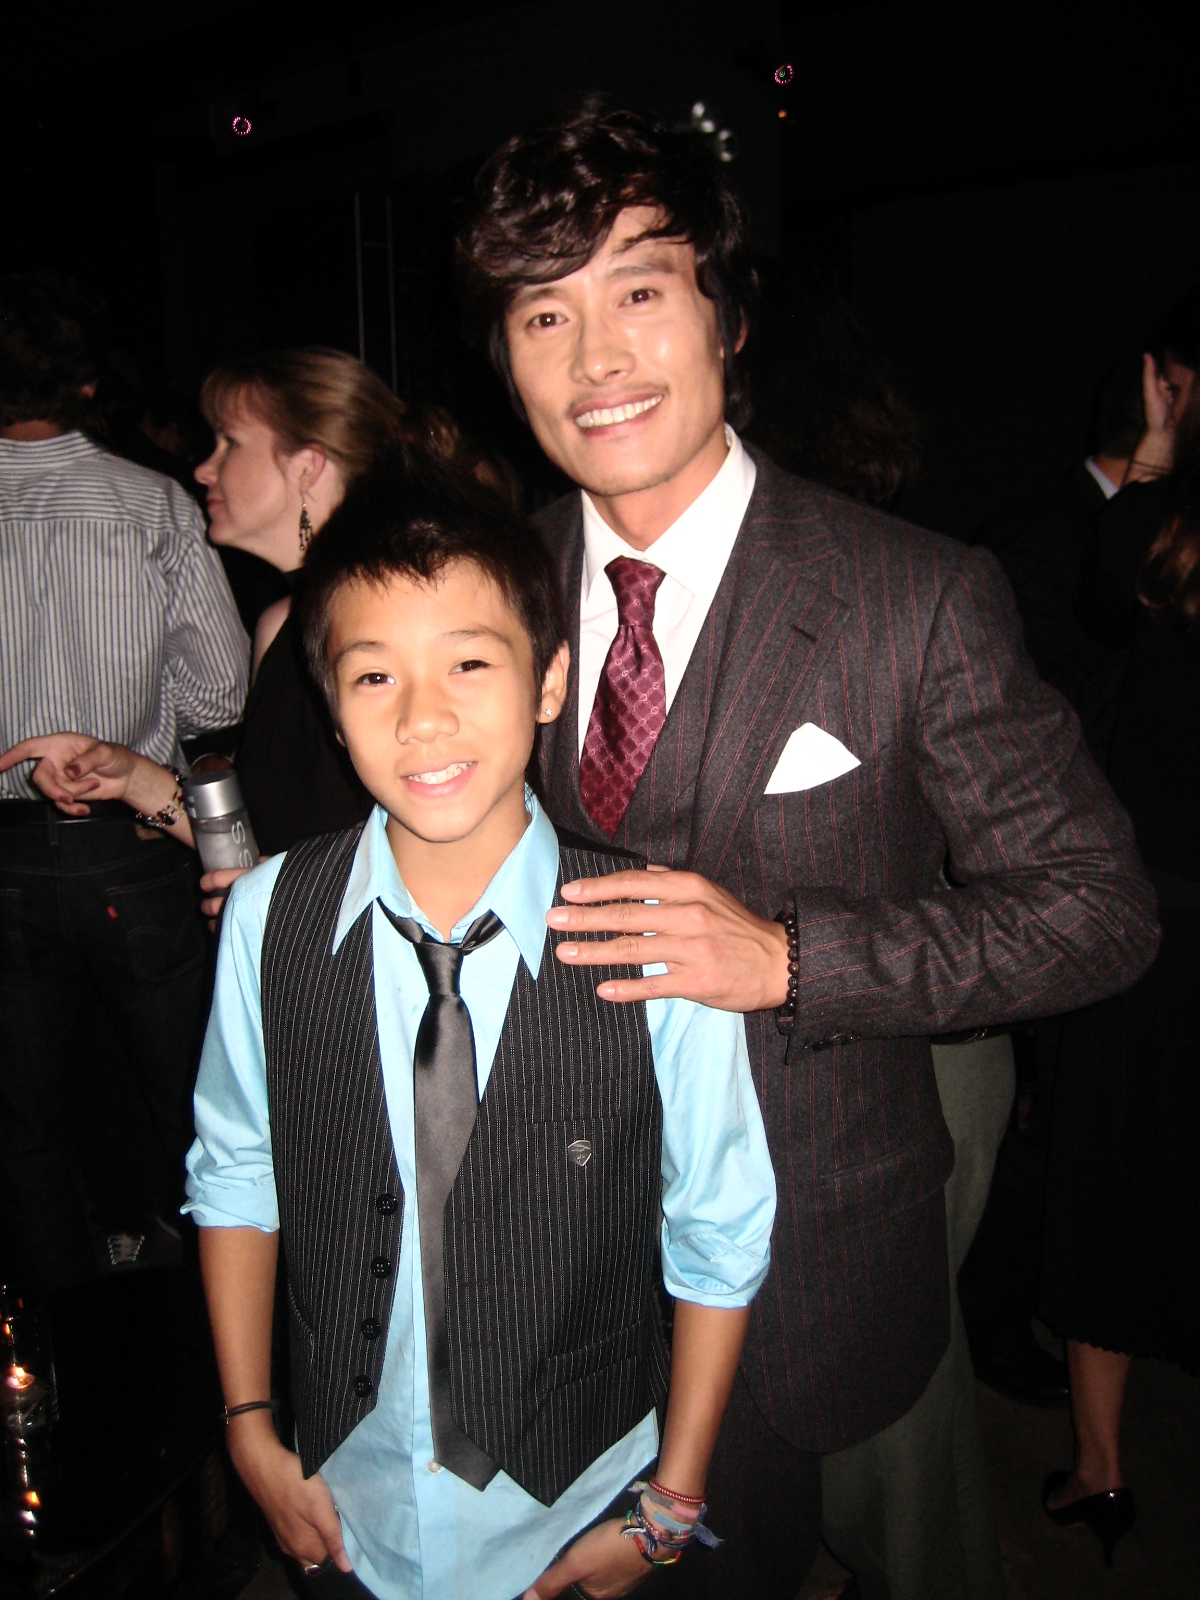 Brandon Soo Hoo with Byung-Hun Lee at the GI Joe Premiere After Party 08/06/09